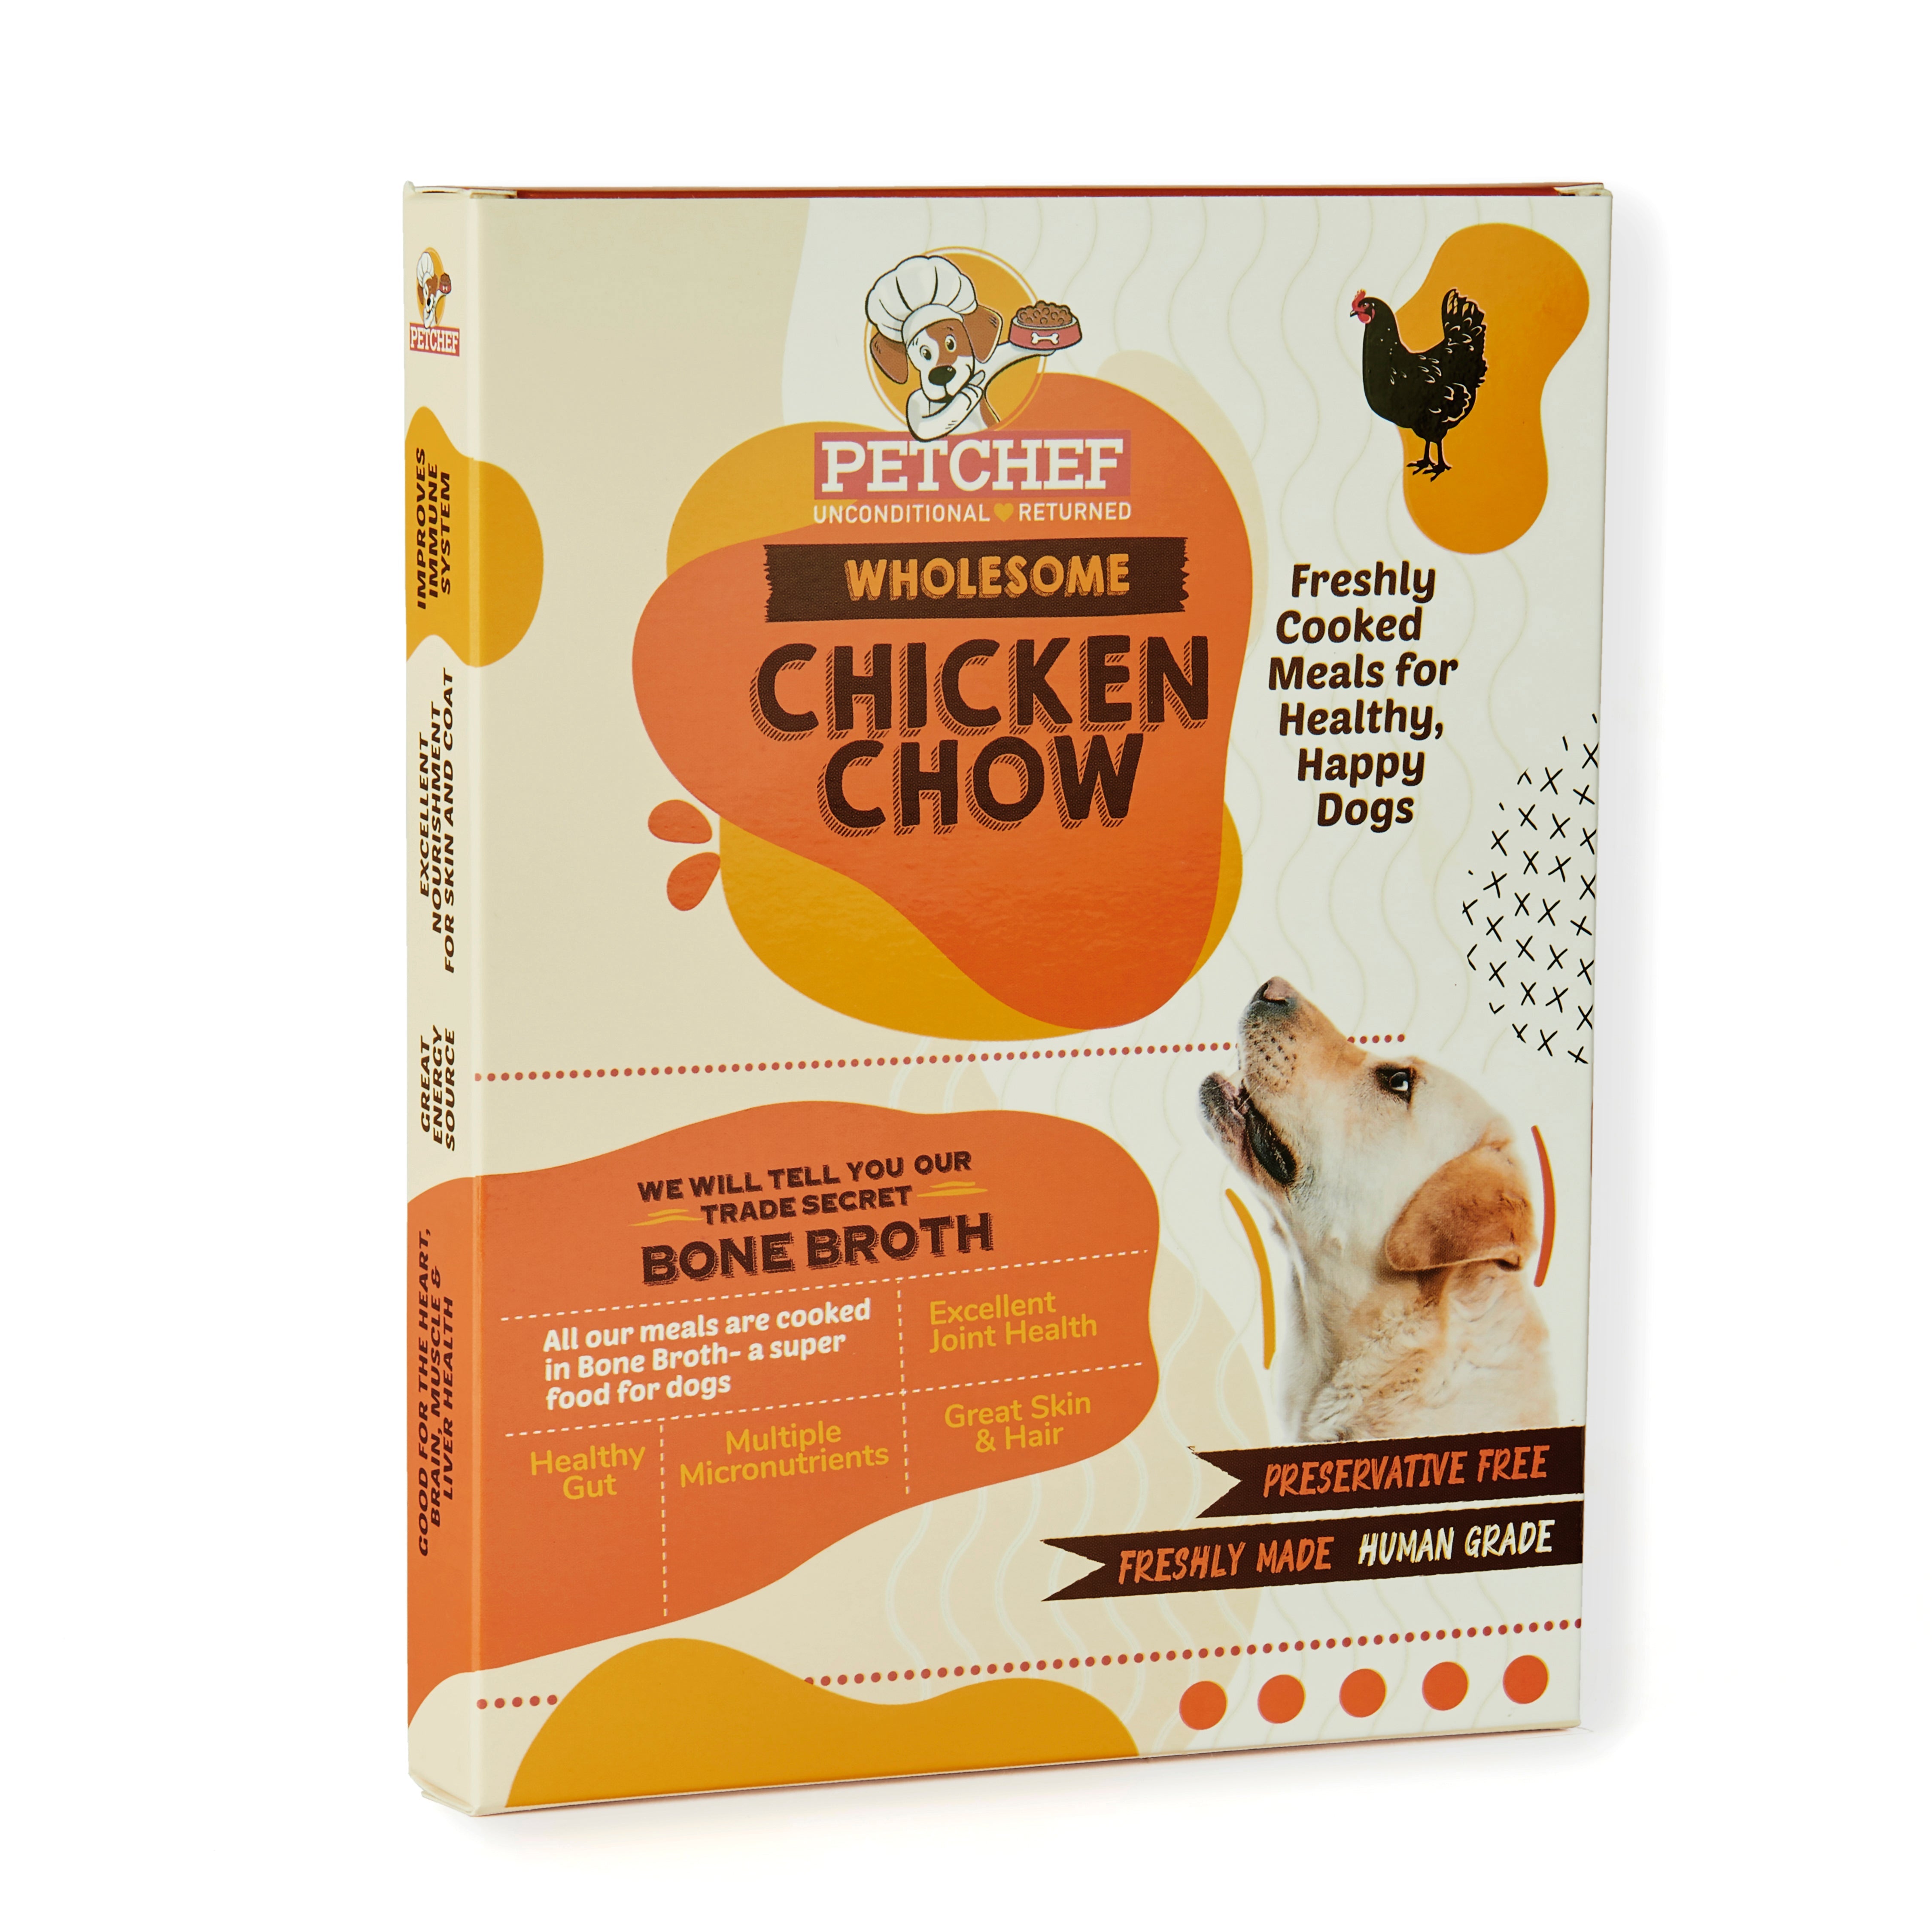 Wholesome Chicken Chow (Monthly Packs)